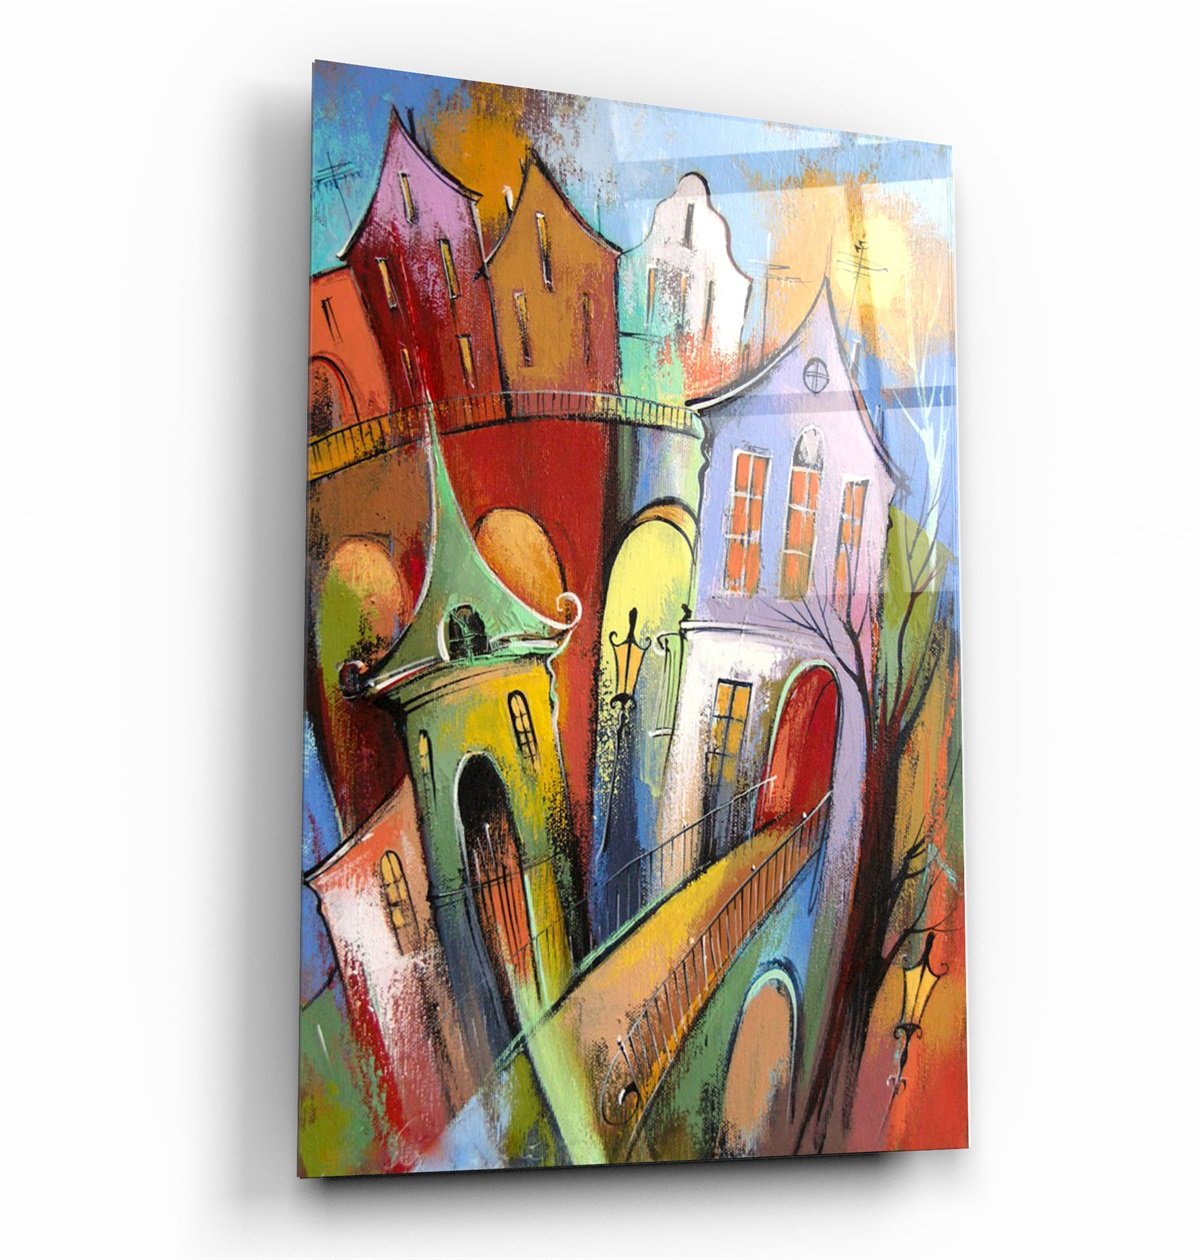 ・"Oil Painting Dream Town"・Glass Wall Art